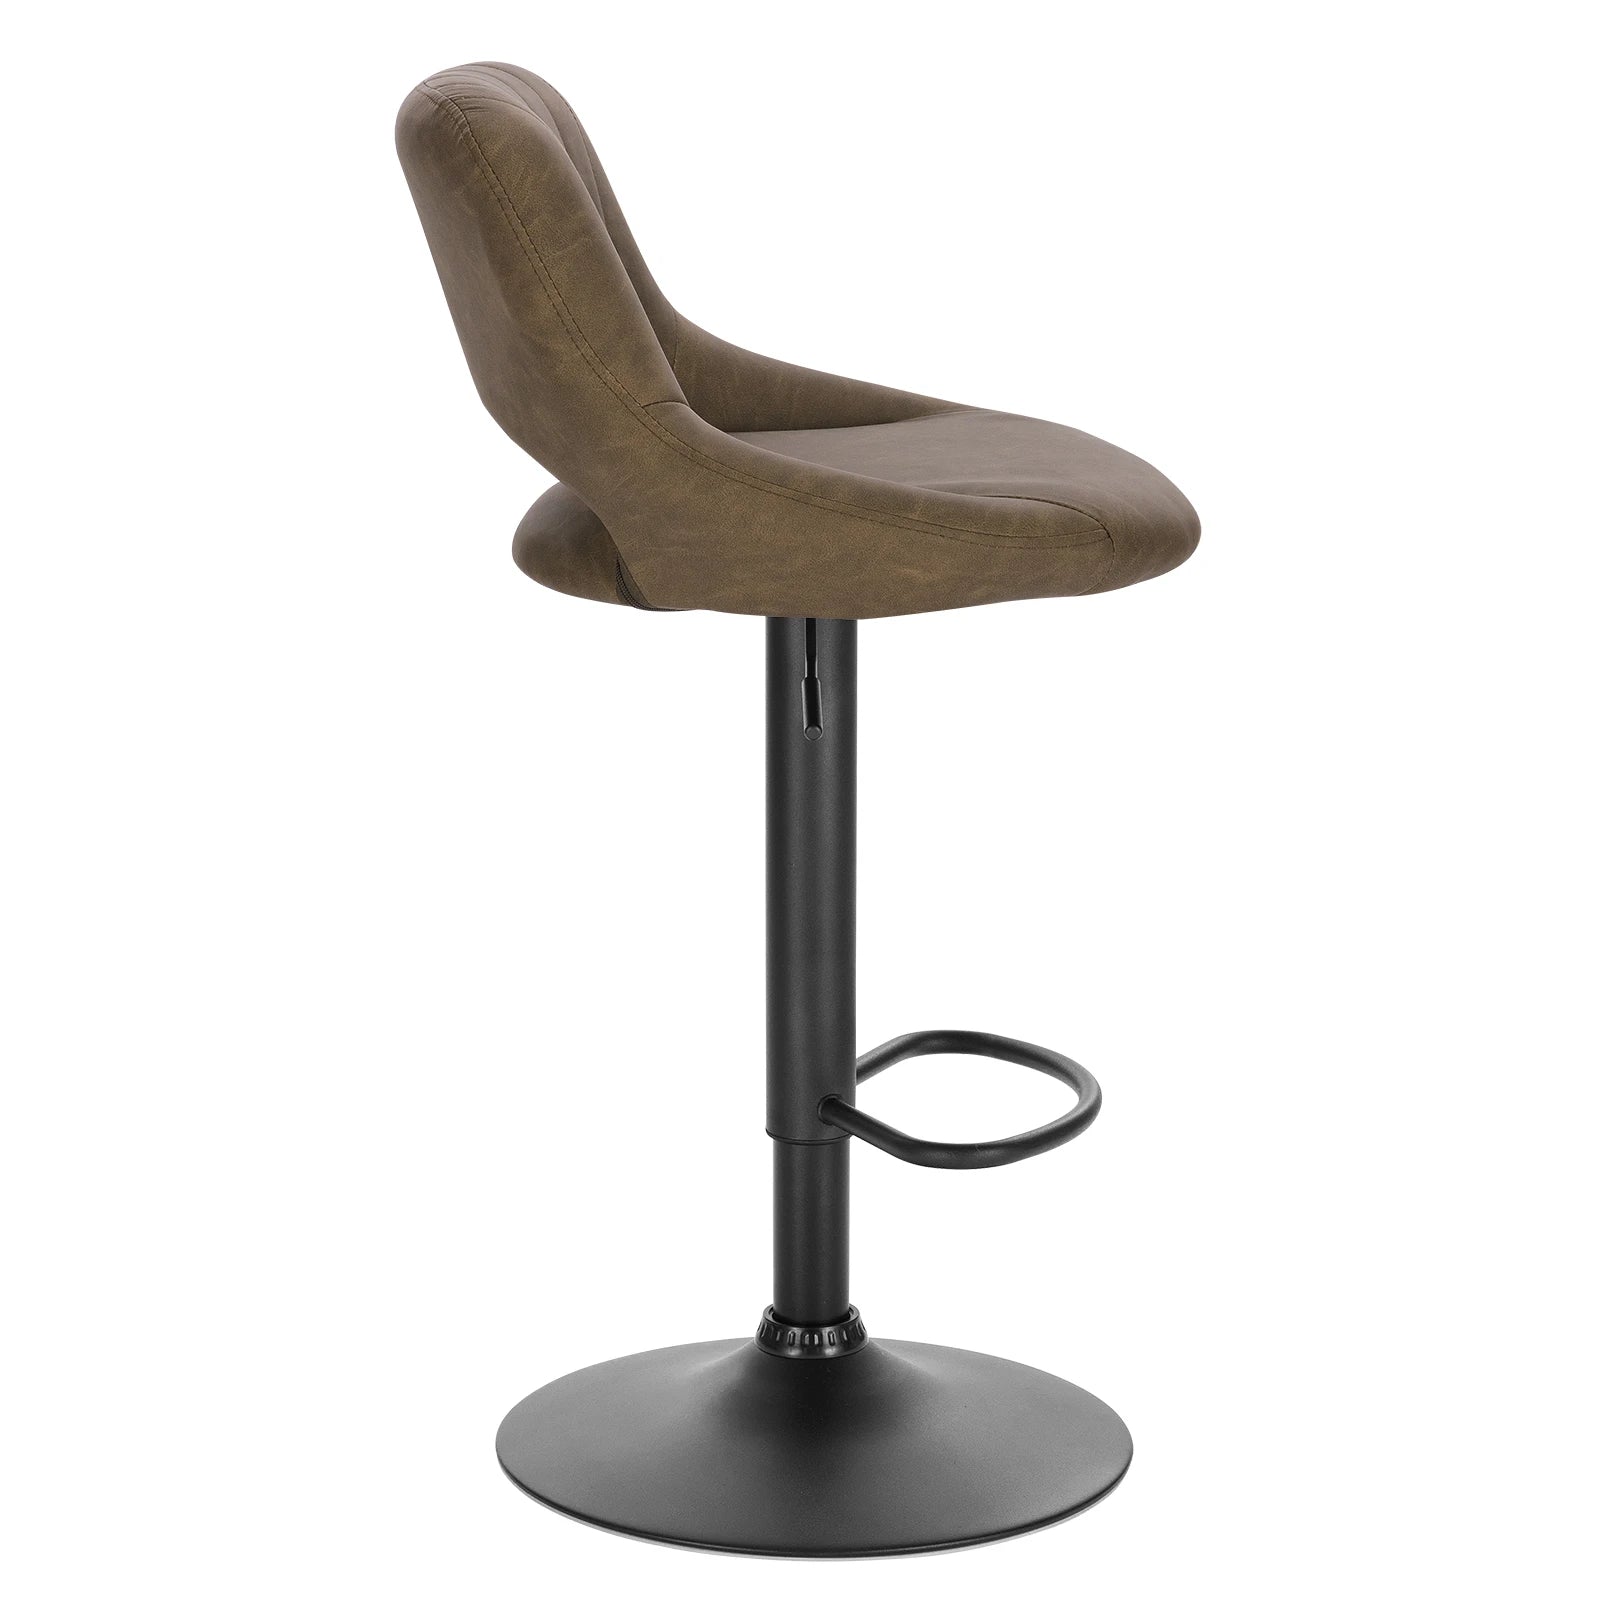 Faux Leather Bar Stools with Backrest 360° Rotatable